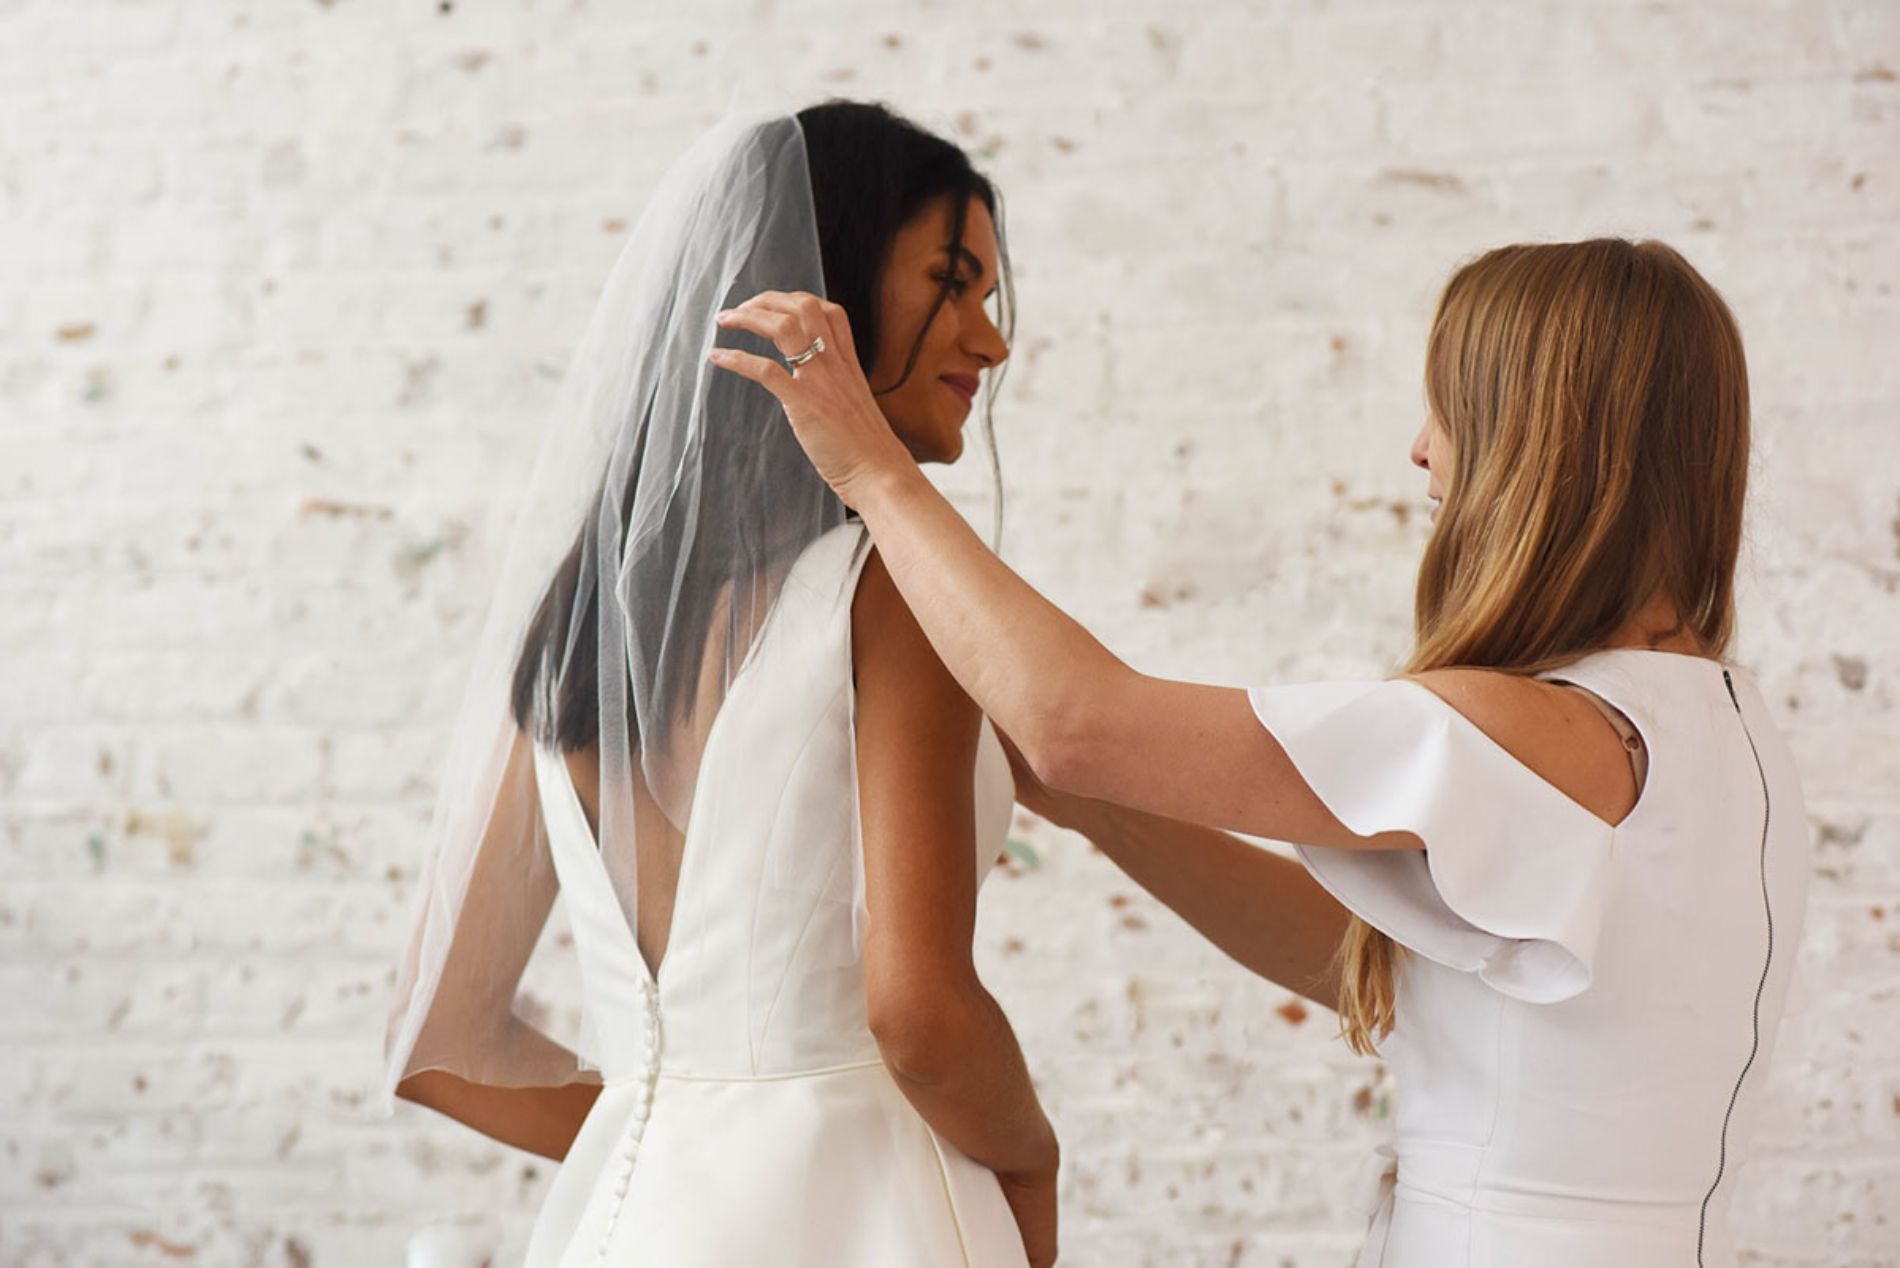 Wedding Dress Alterations in San Antonio: Perfect Fit for Your